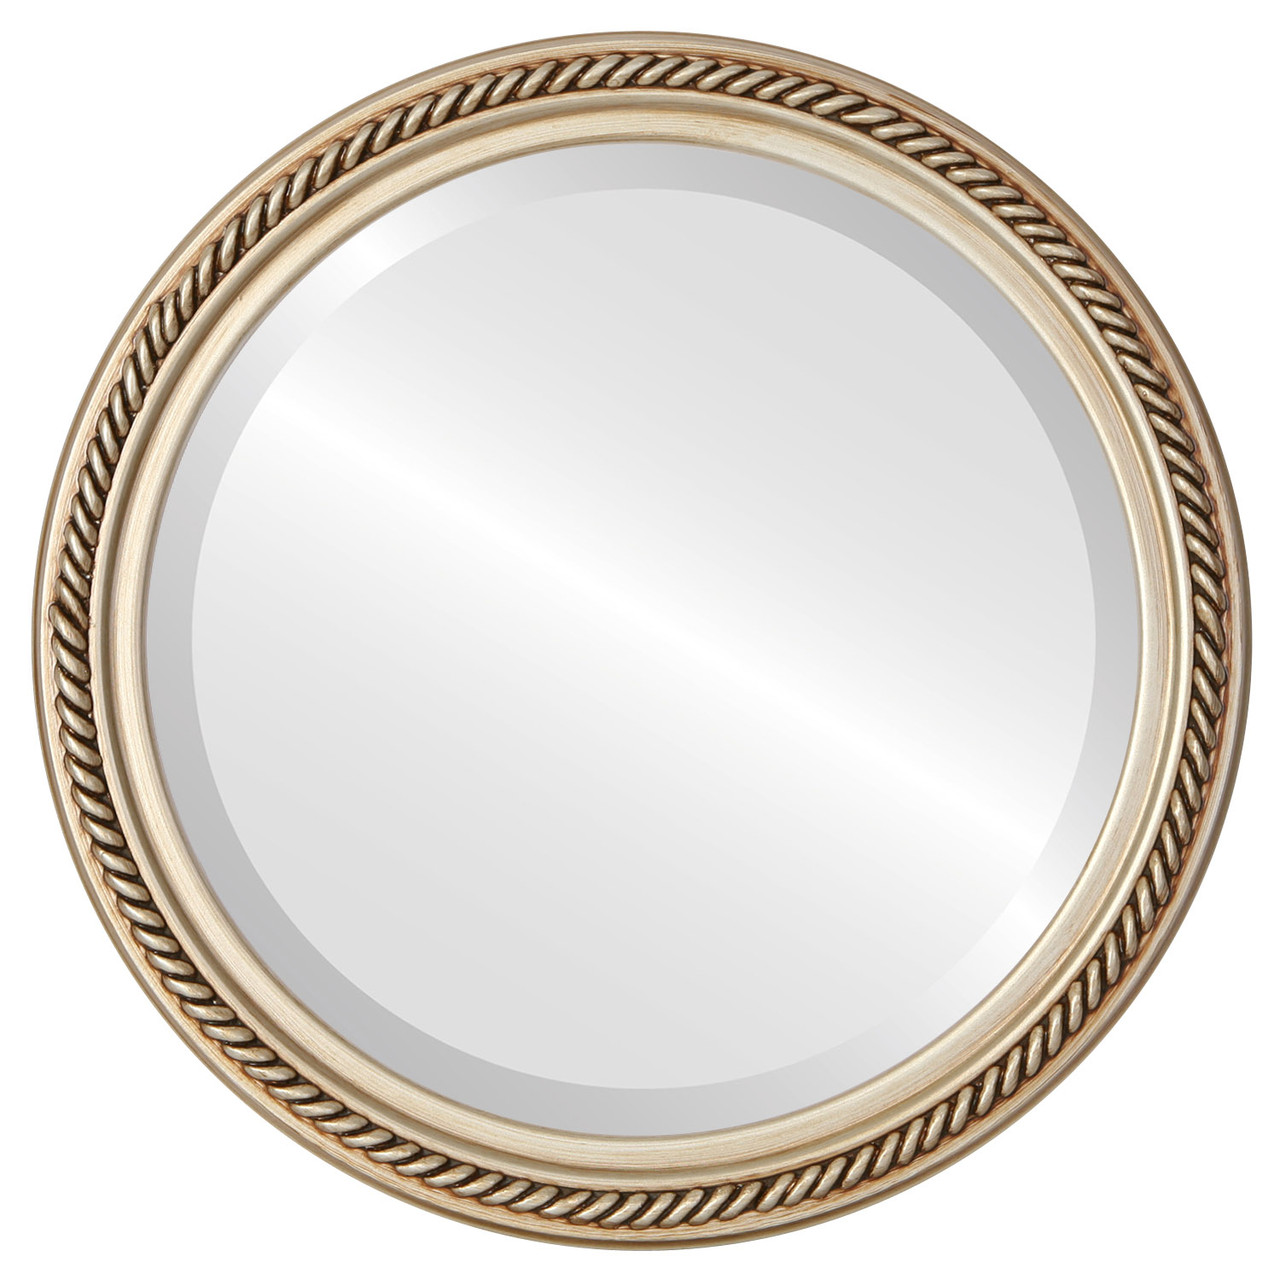 Antique Silver Round Mirrors from $136 Free Shipping